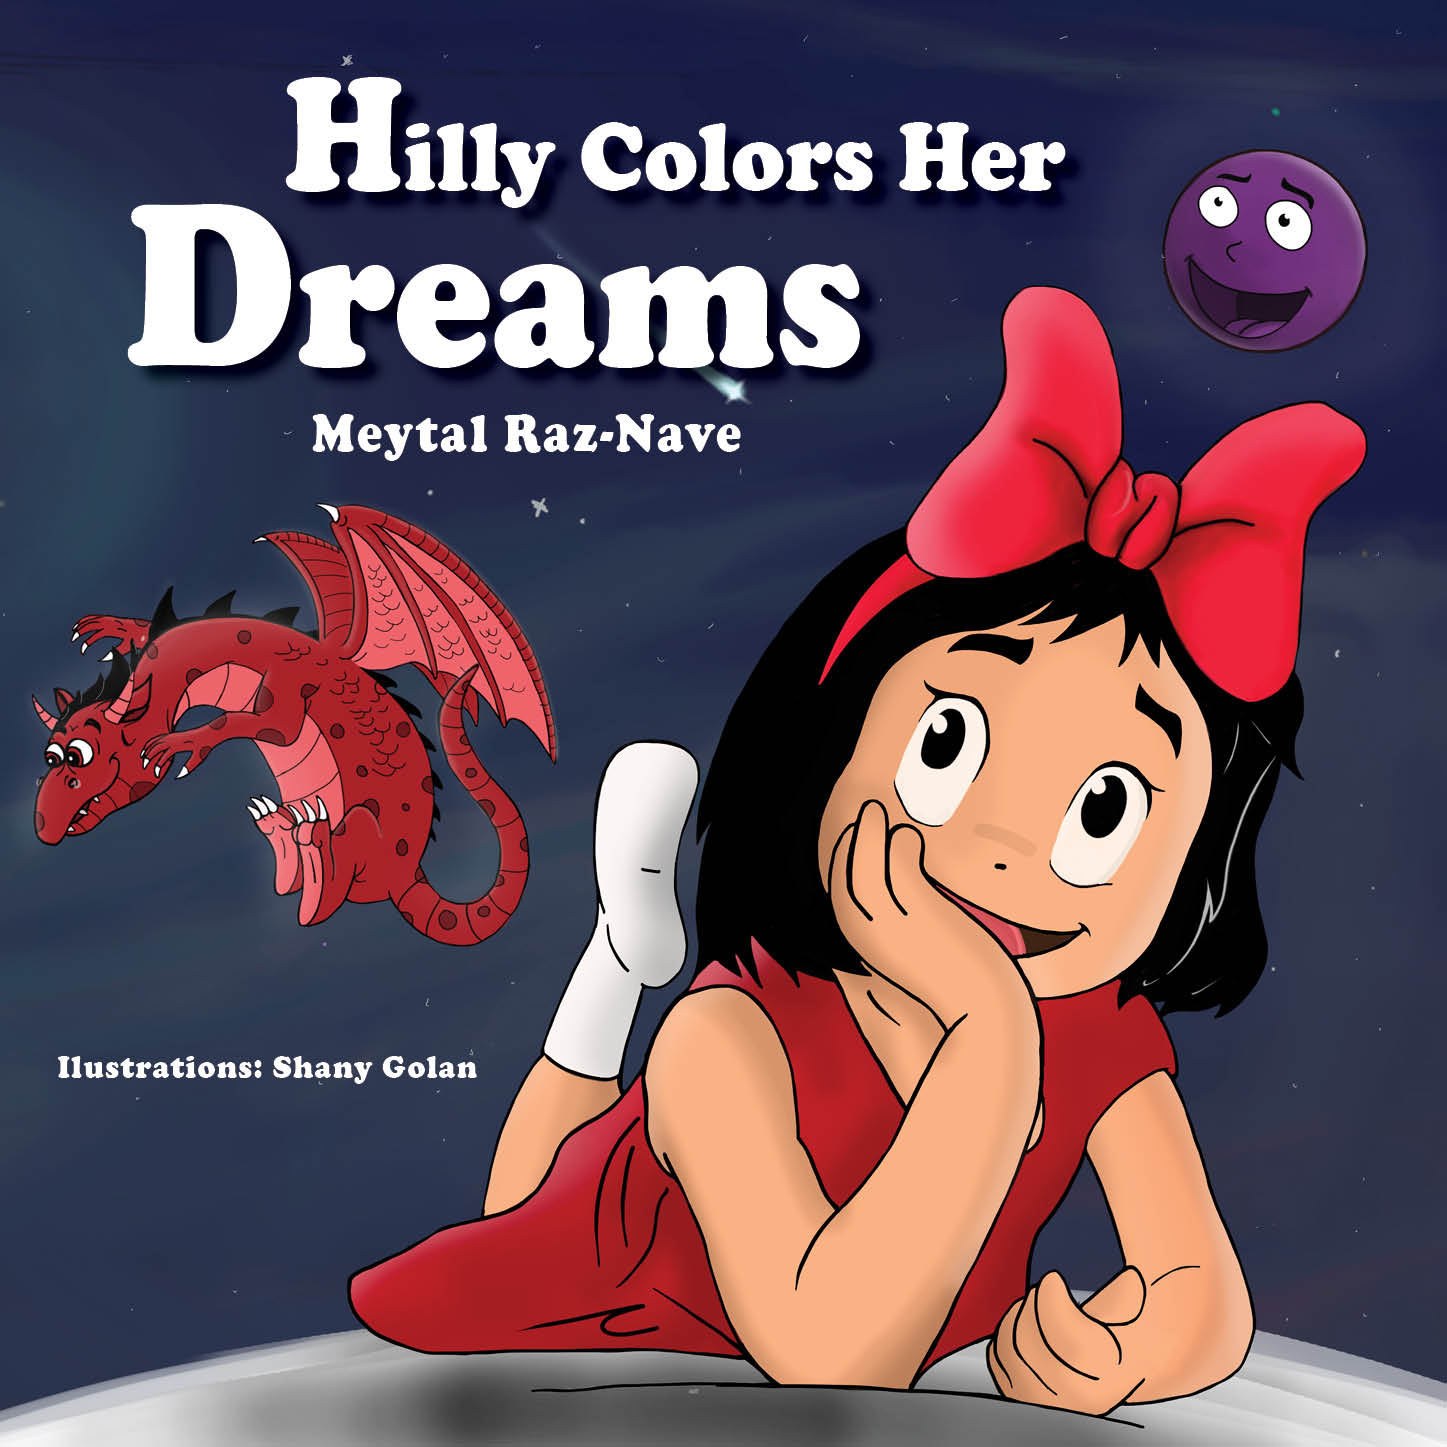 Hilly Colors Her Dreams by Meytal Raz-Nave